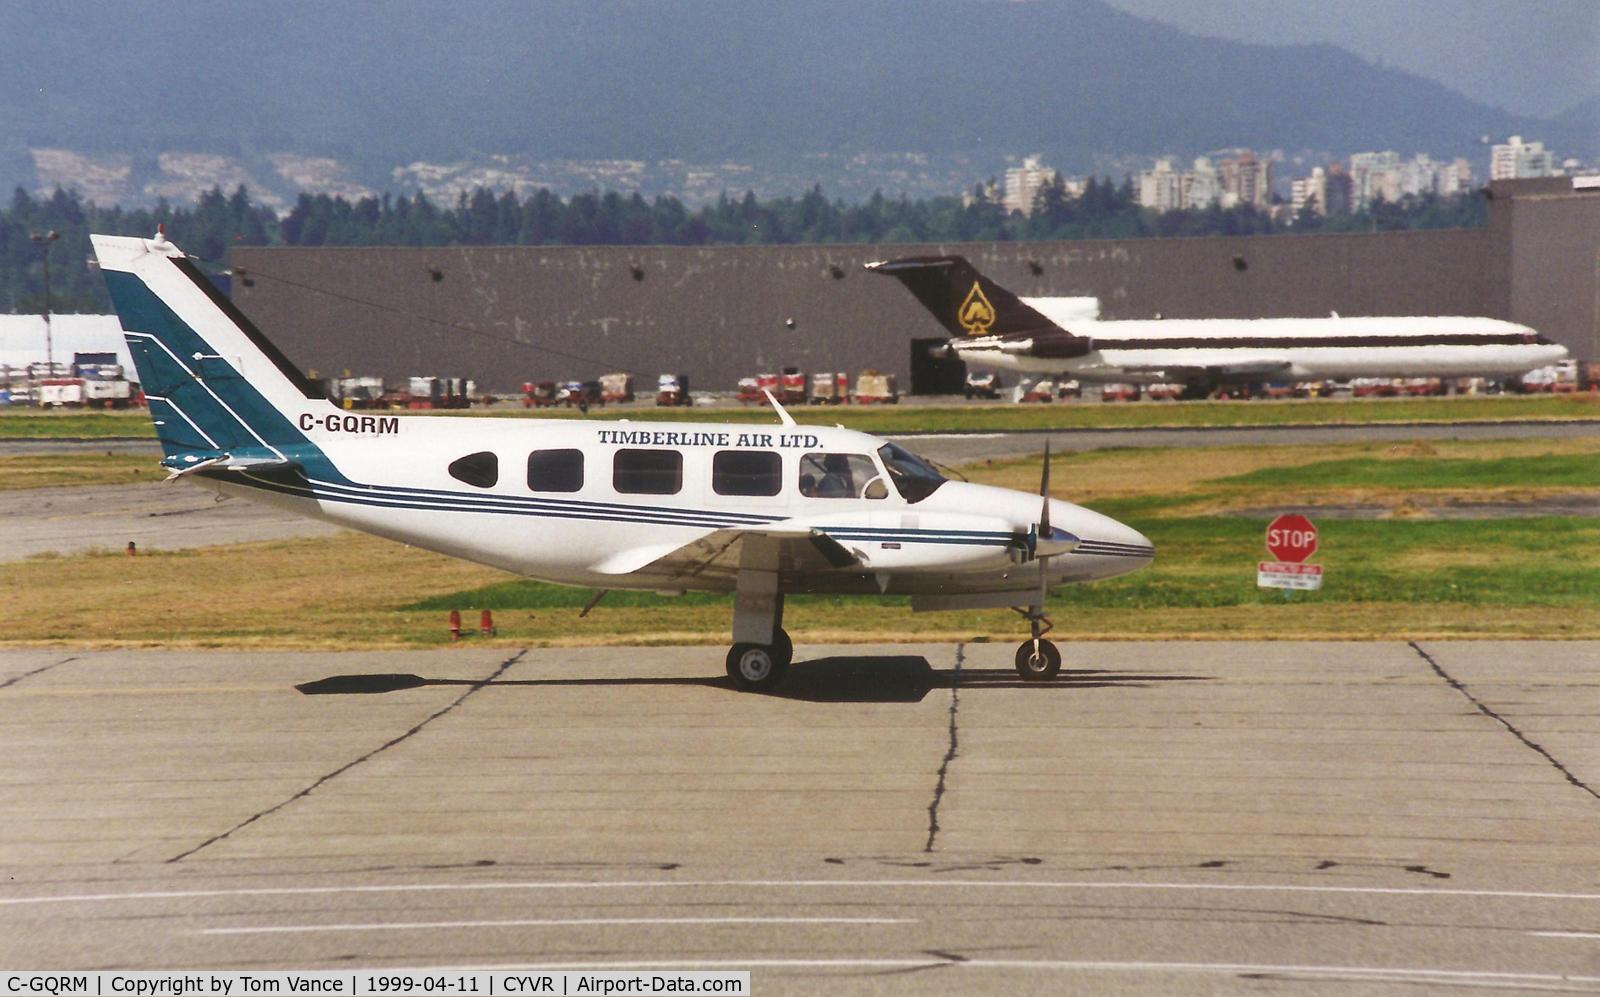 C-GQRM, 1968 Piper PA-31 Navajo C/N 31-158, Timberline Air at CYVR on taxi to the departure runways. Date apprx April 1999.